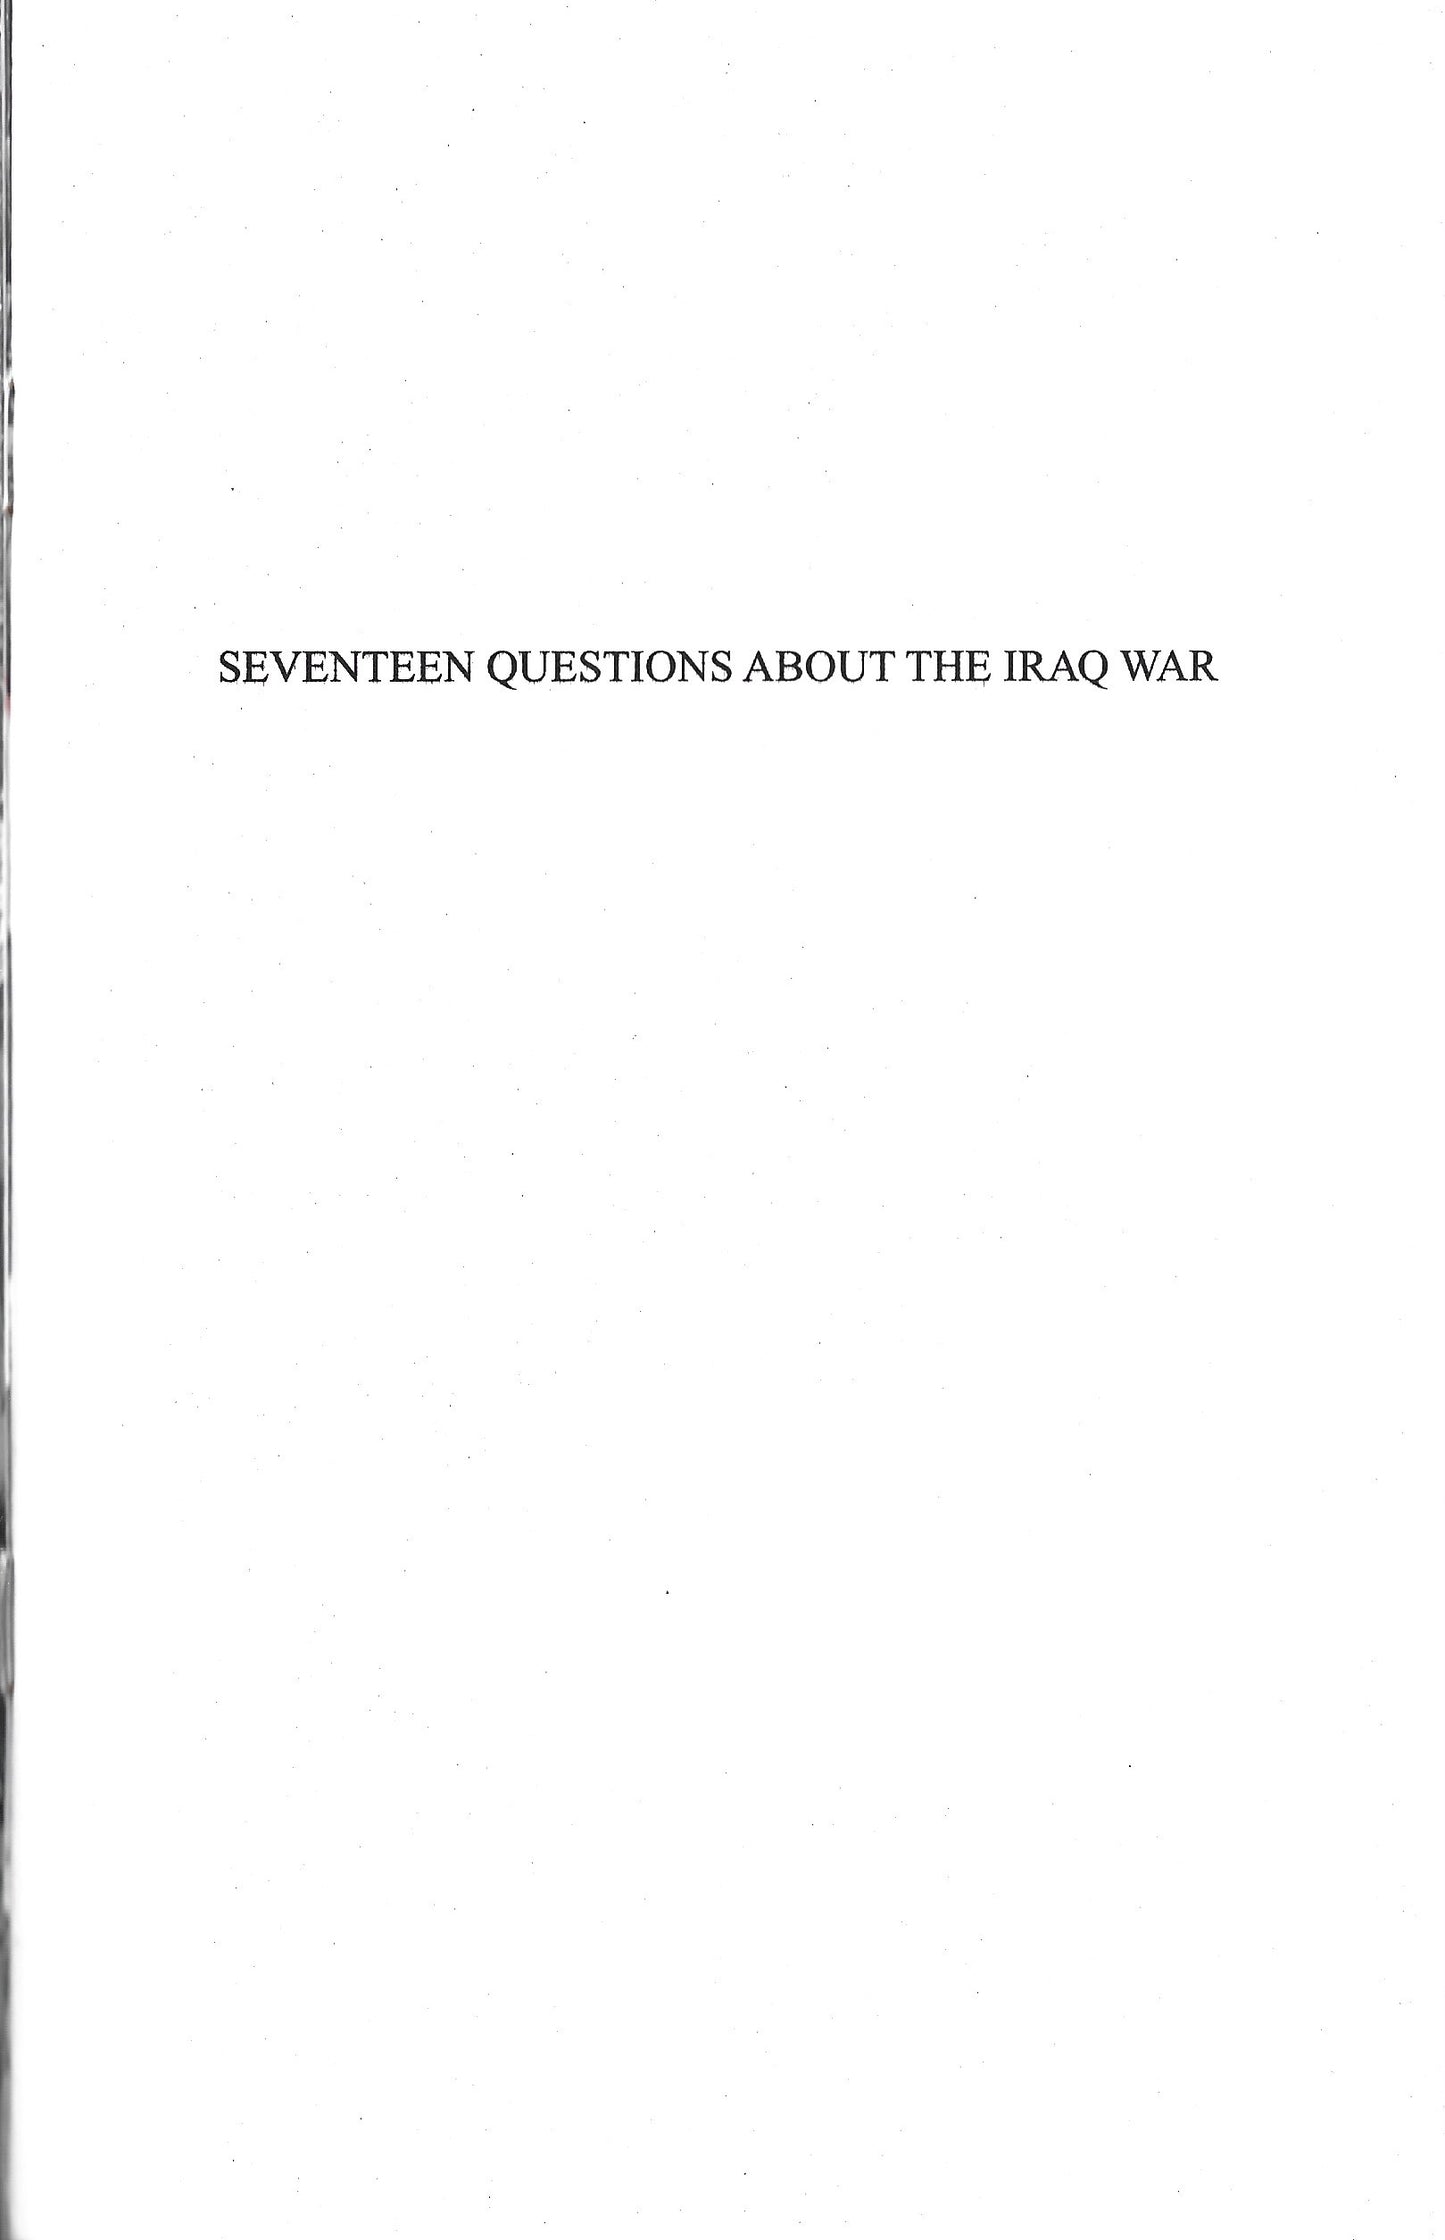 17 Questions About the Iraq War